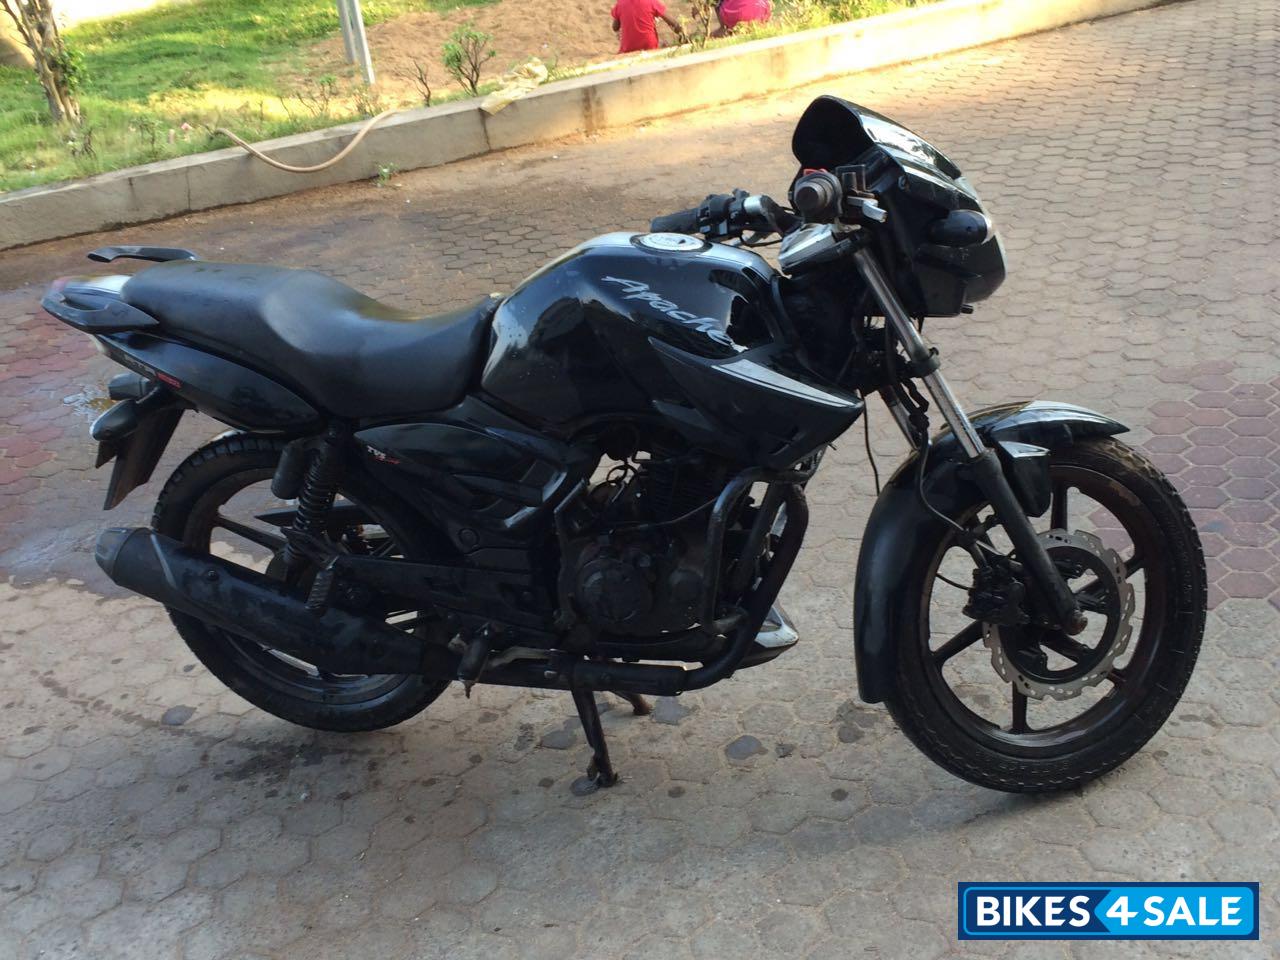 Used 08 Model Tvs Apache Rtr 160 For Sale In Udupi Id 17 Black Colour Bikes4sale